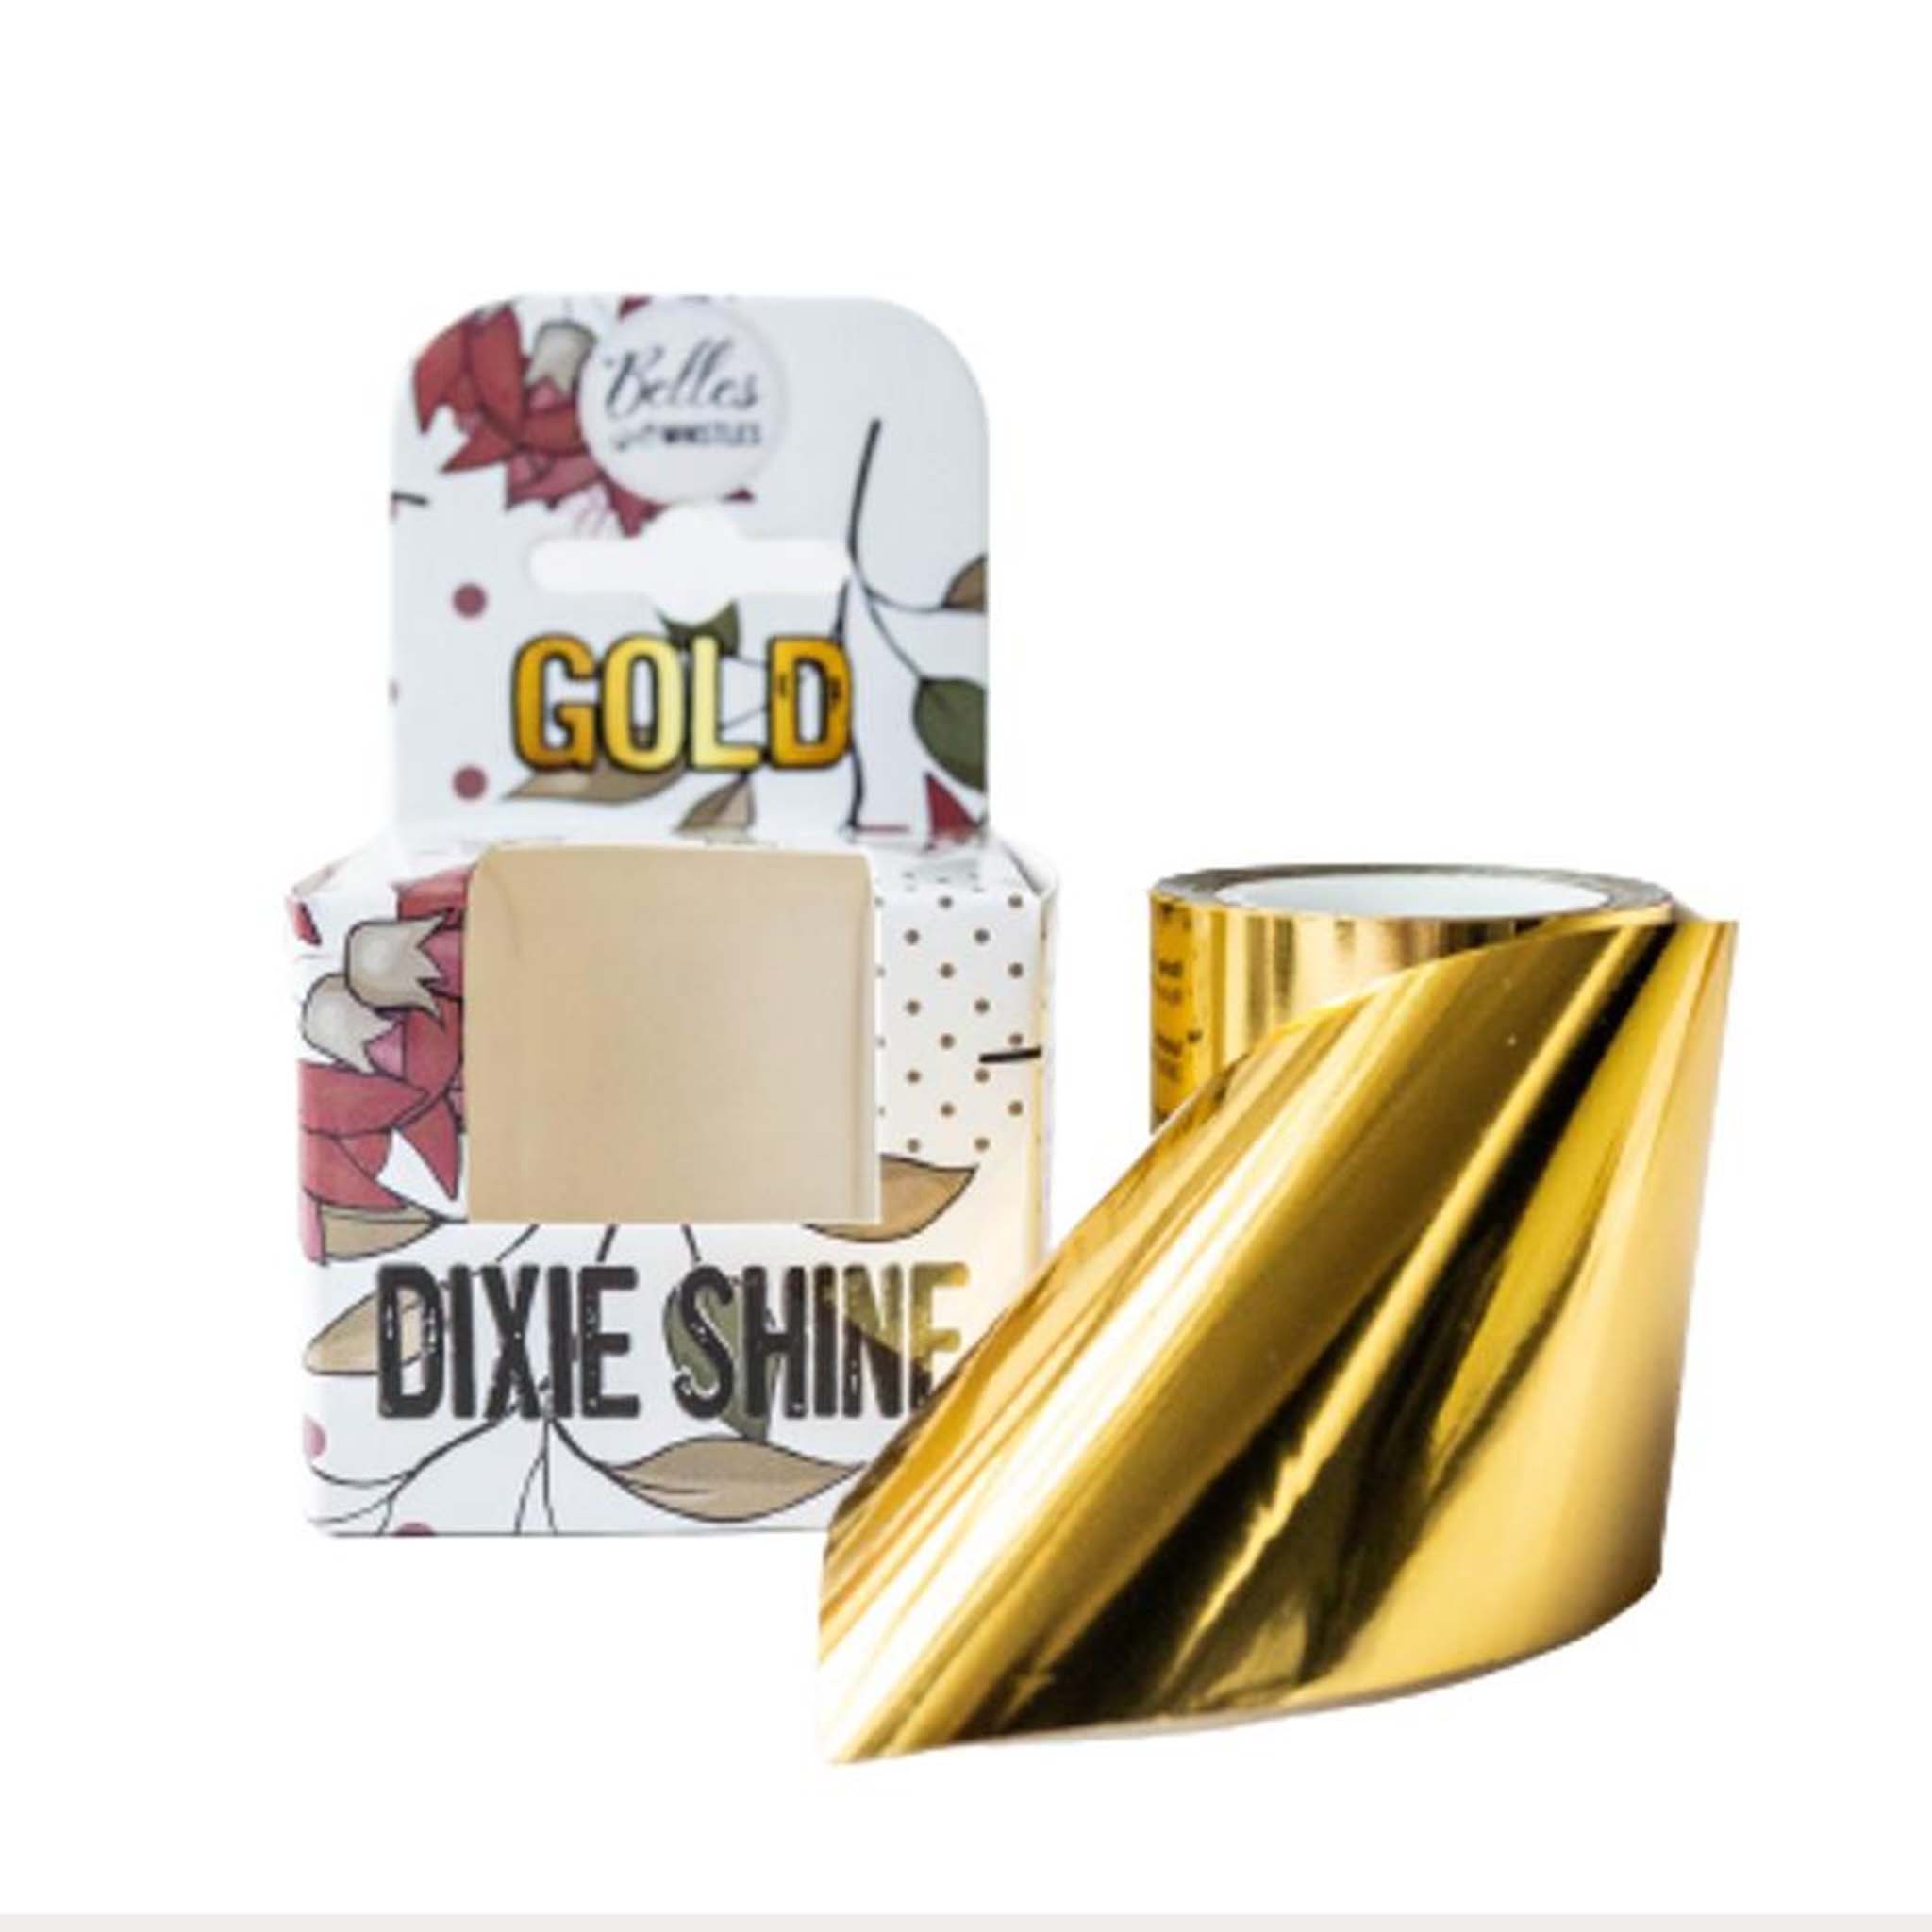 A package of Belles & Whistles Dixie Shine Gold is on a white background. The foil roll is displayed next to the package.